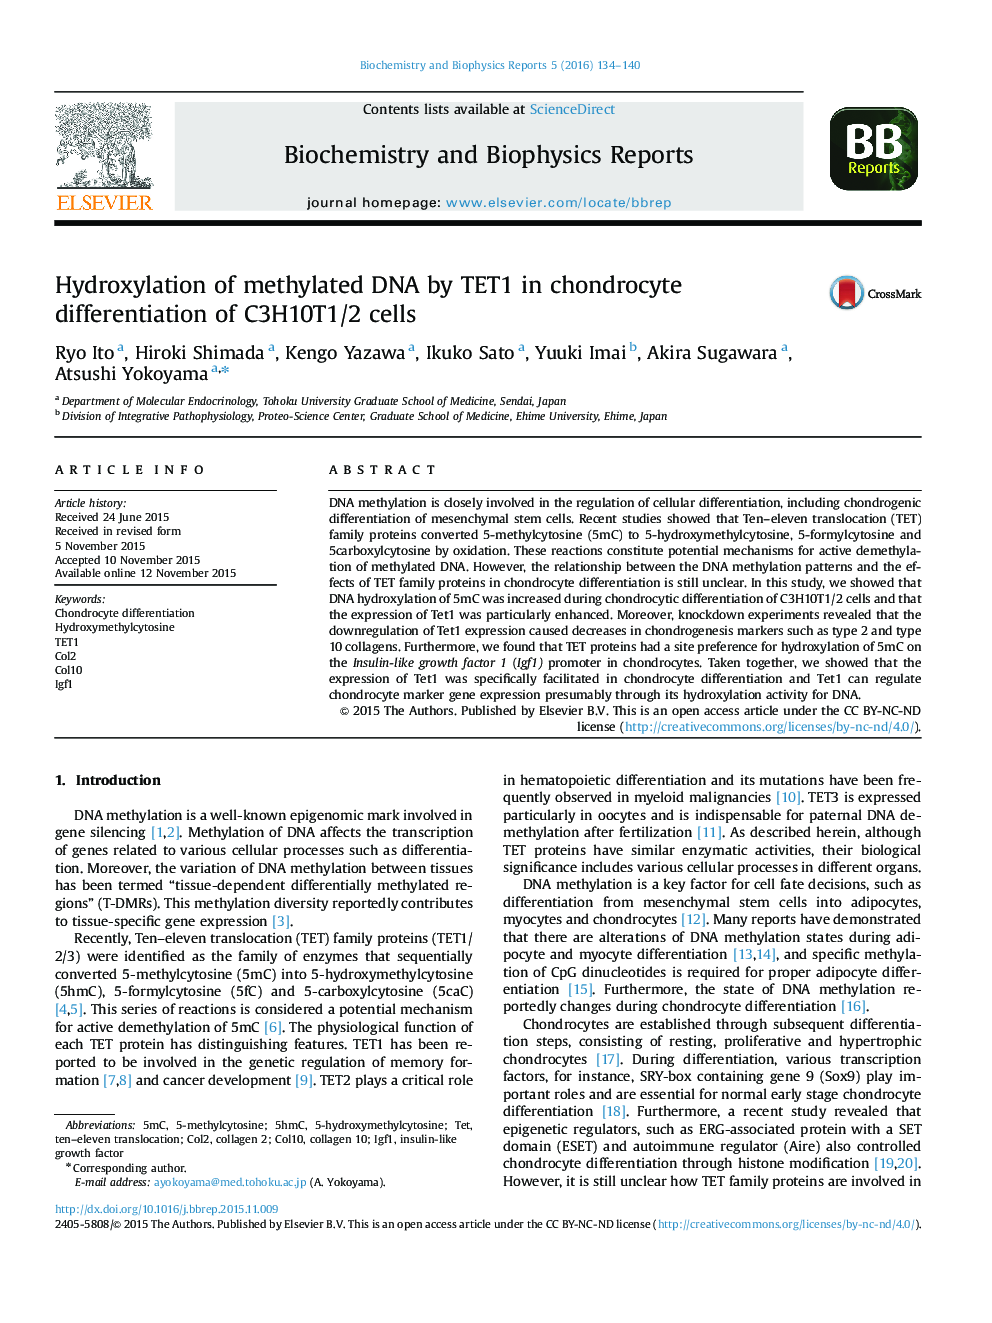 Hydroxylation of methylated DNA by TET1 in chondrocyte differentiation of C3H10T1/2 cells